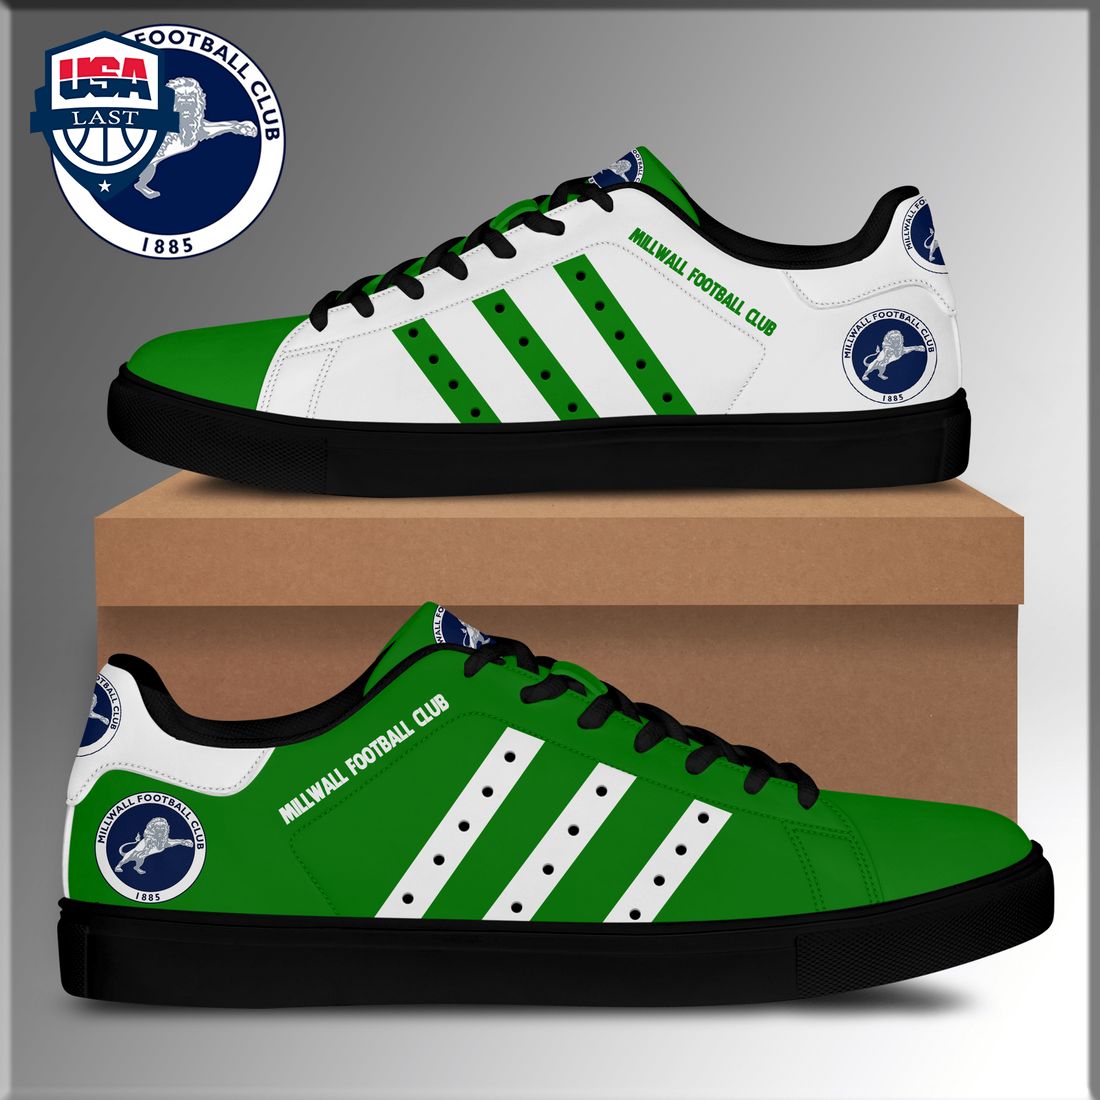 millwall-football-club-green-white-stan-smith-low-top-shoes-1-BcYlR.jpg